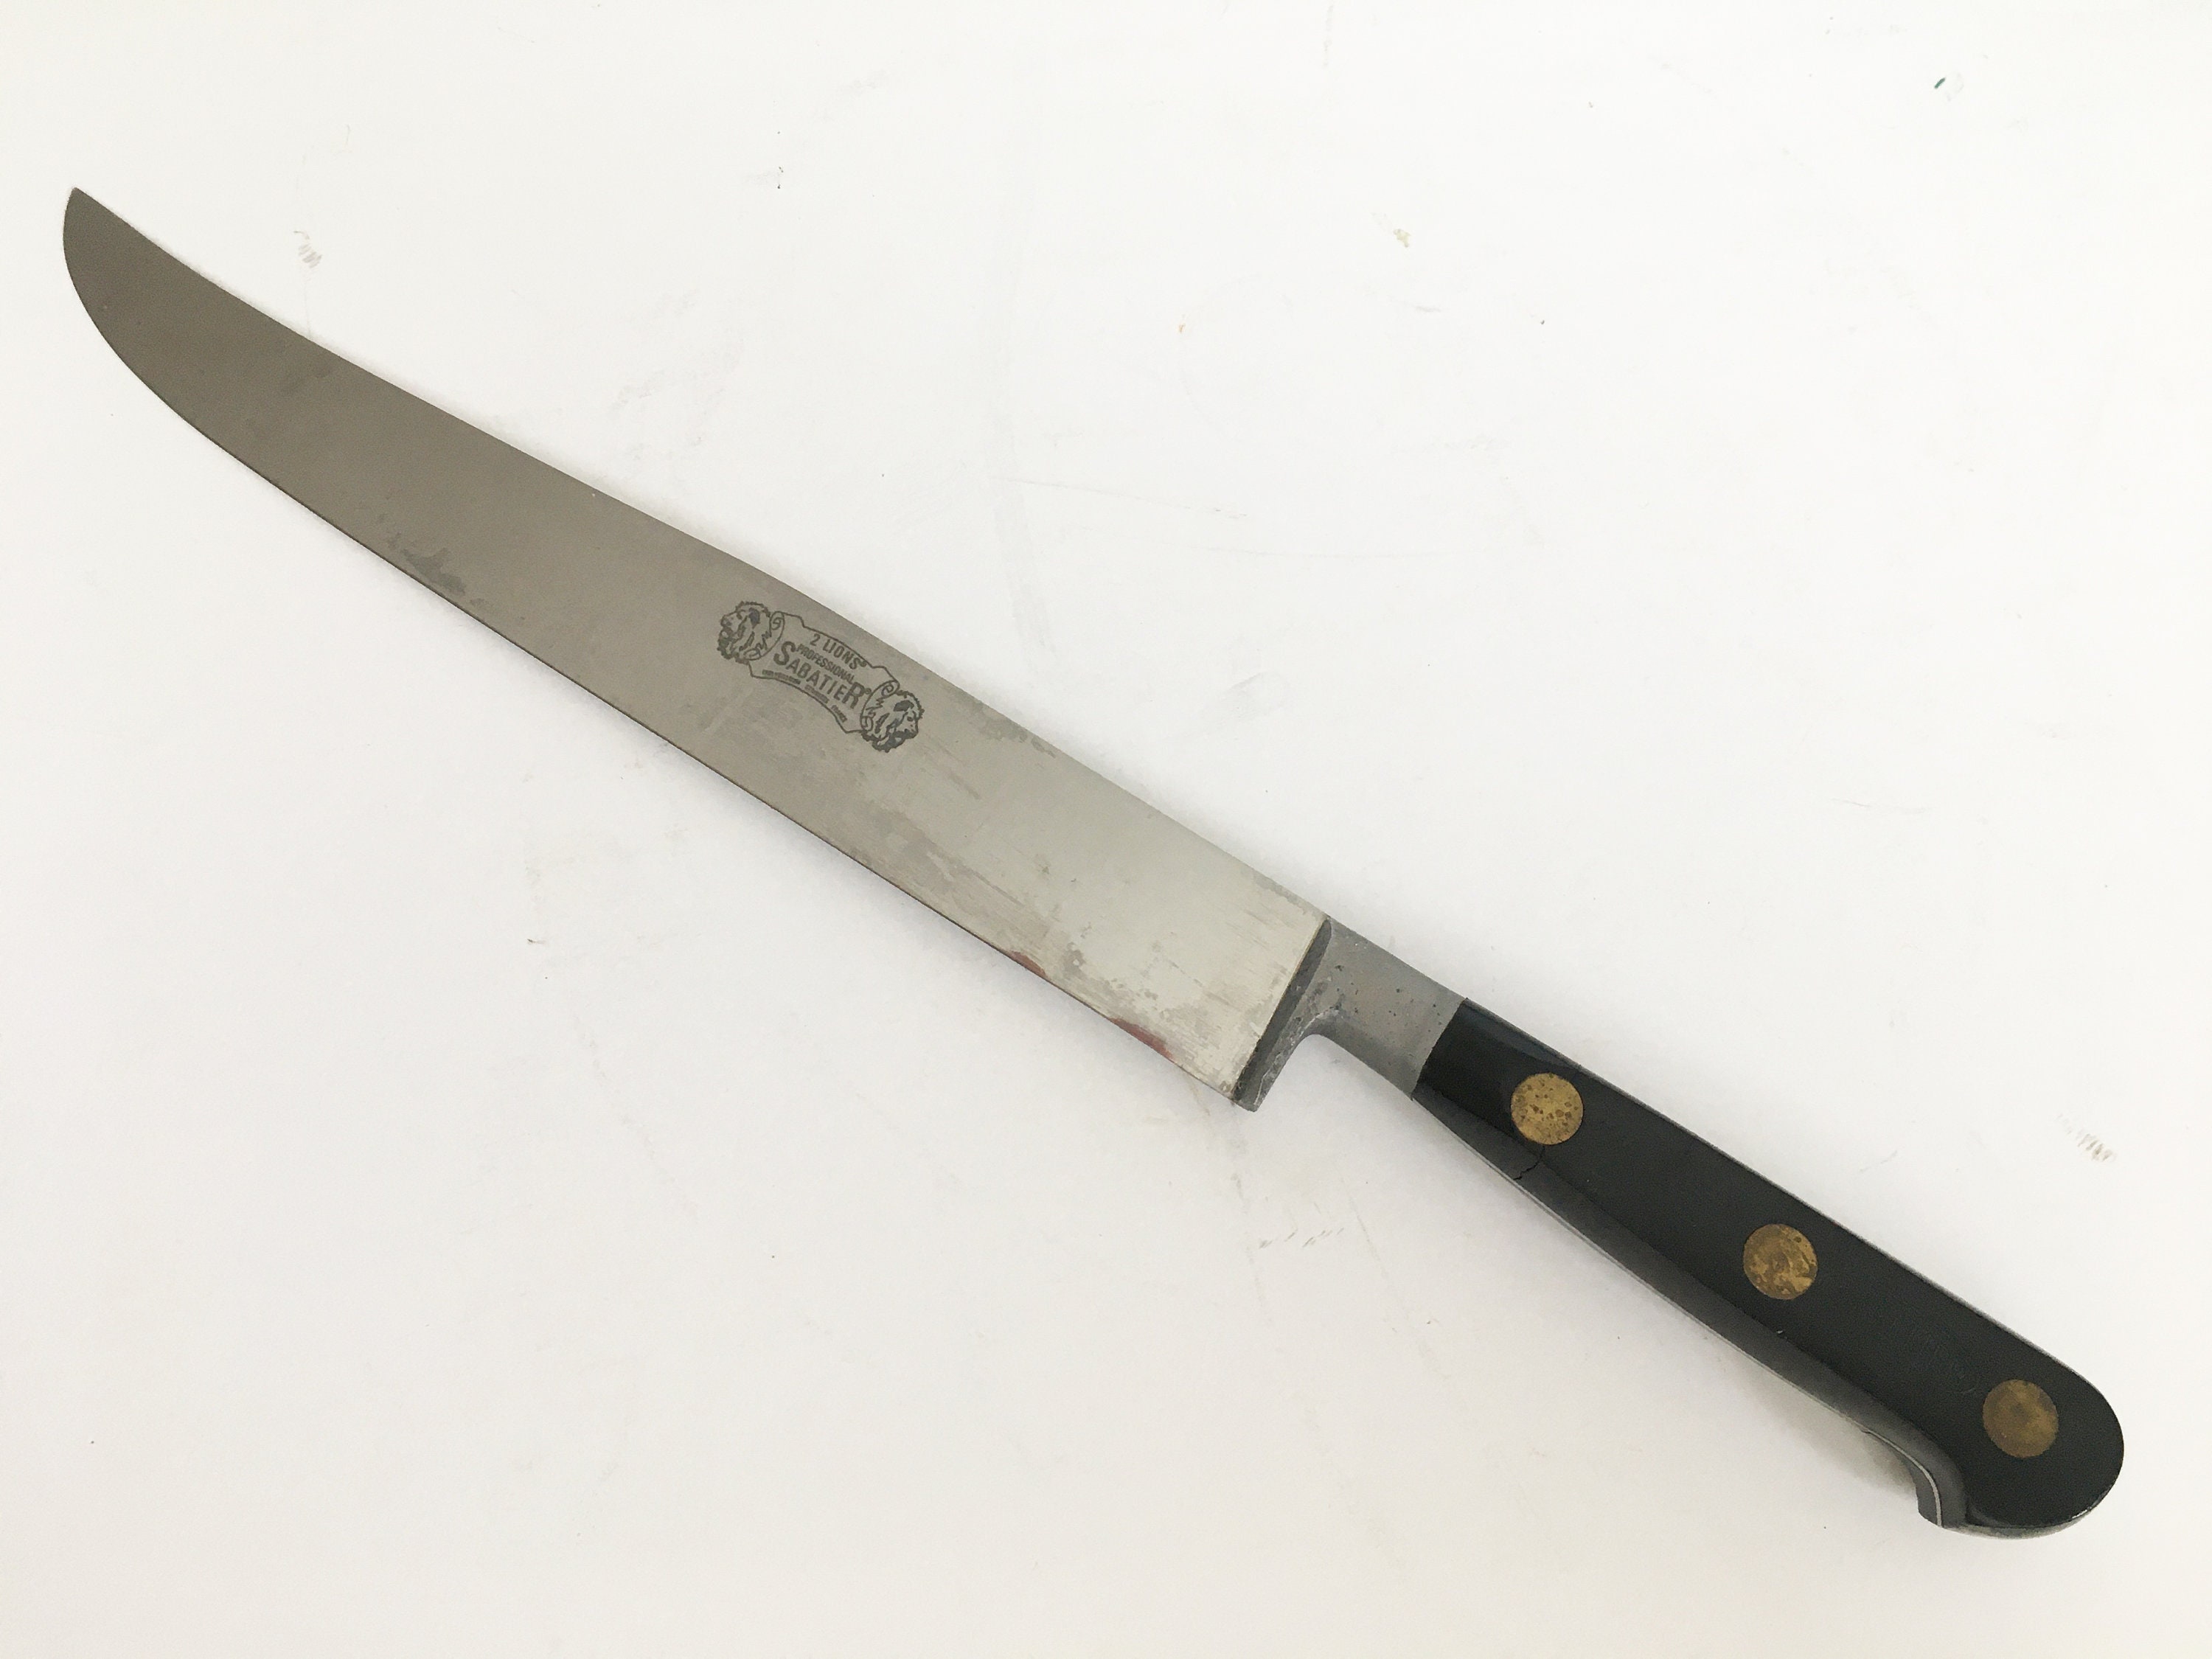 Vintage Sabatier French made Chef Knife with Scabbard – Health Craft